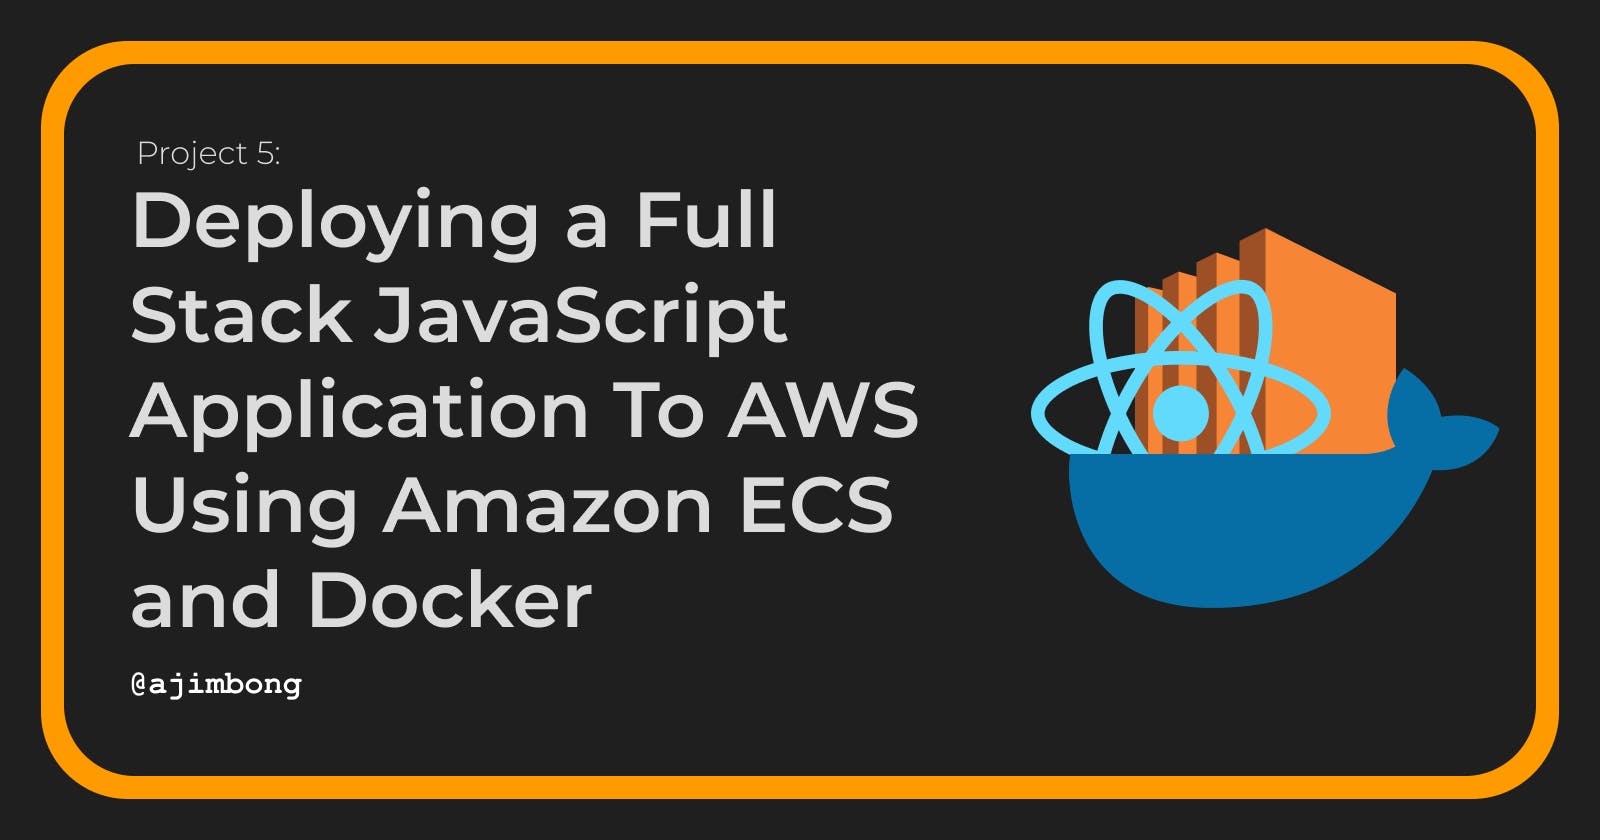 Deploy A Full Stack JavaScript Application With Amazon ECS and Docker